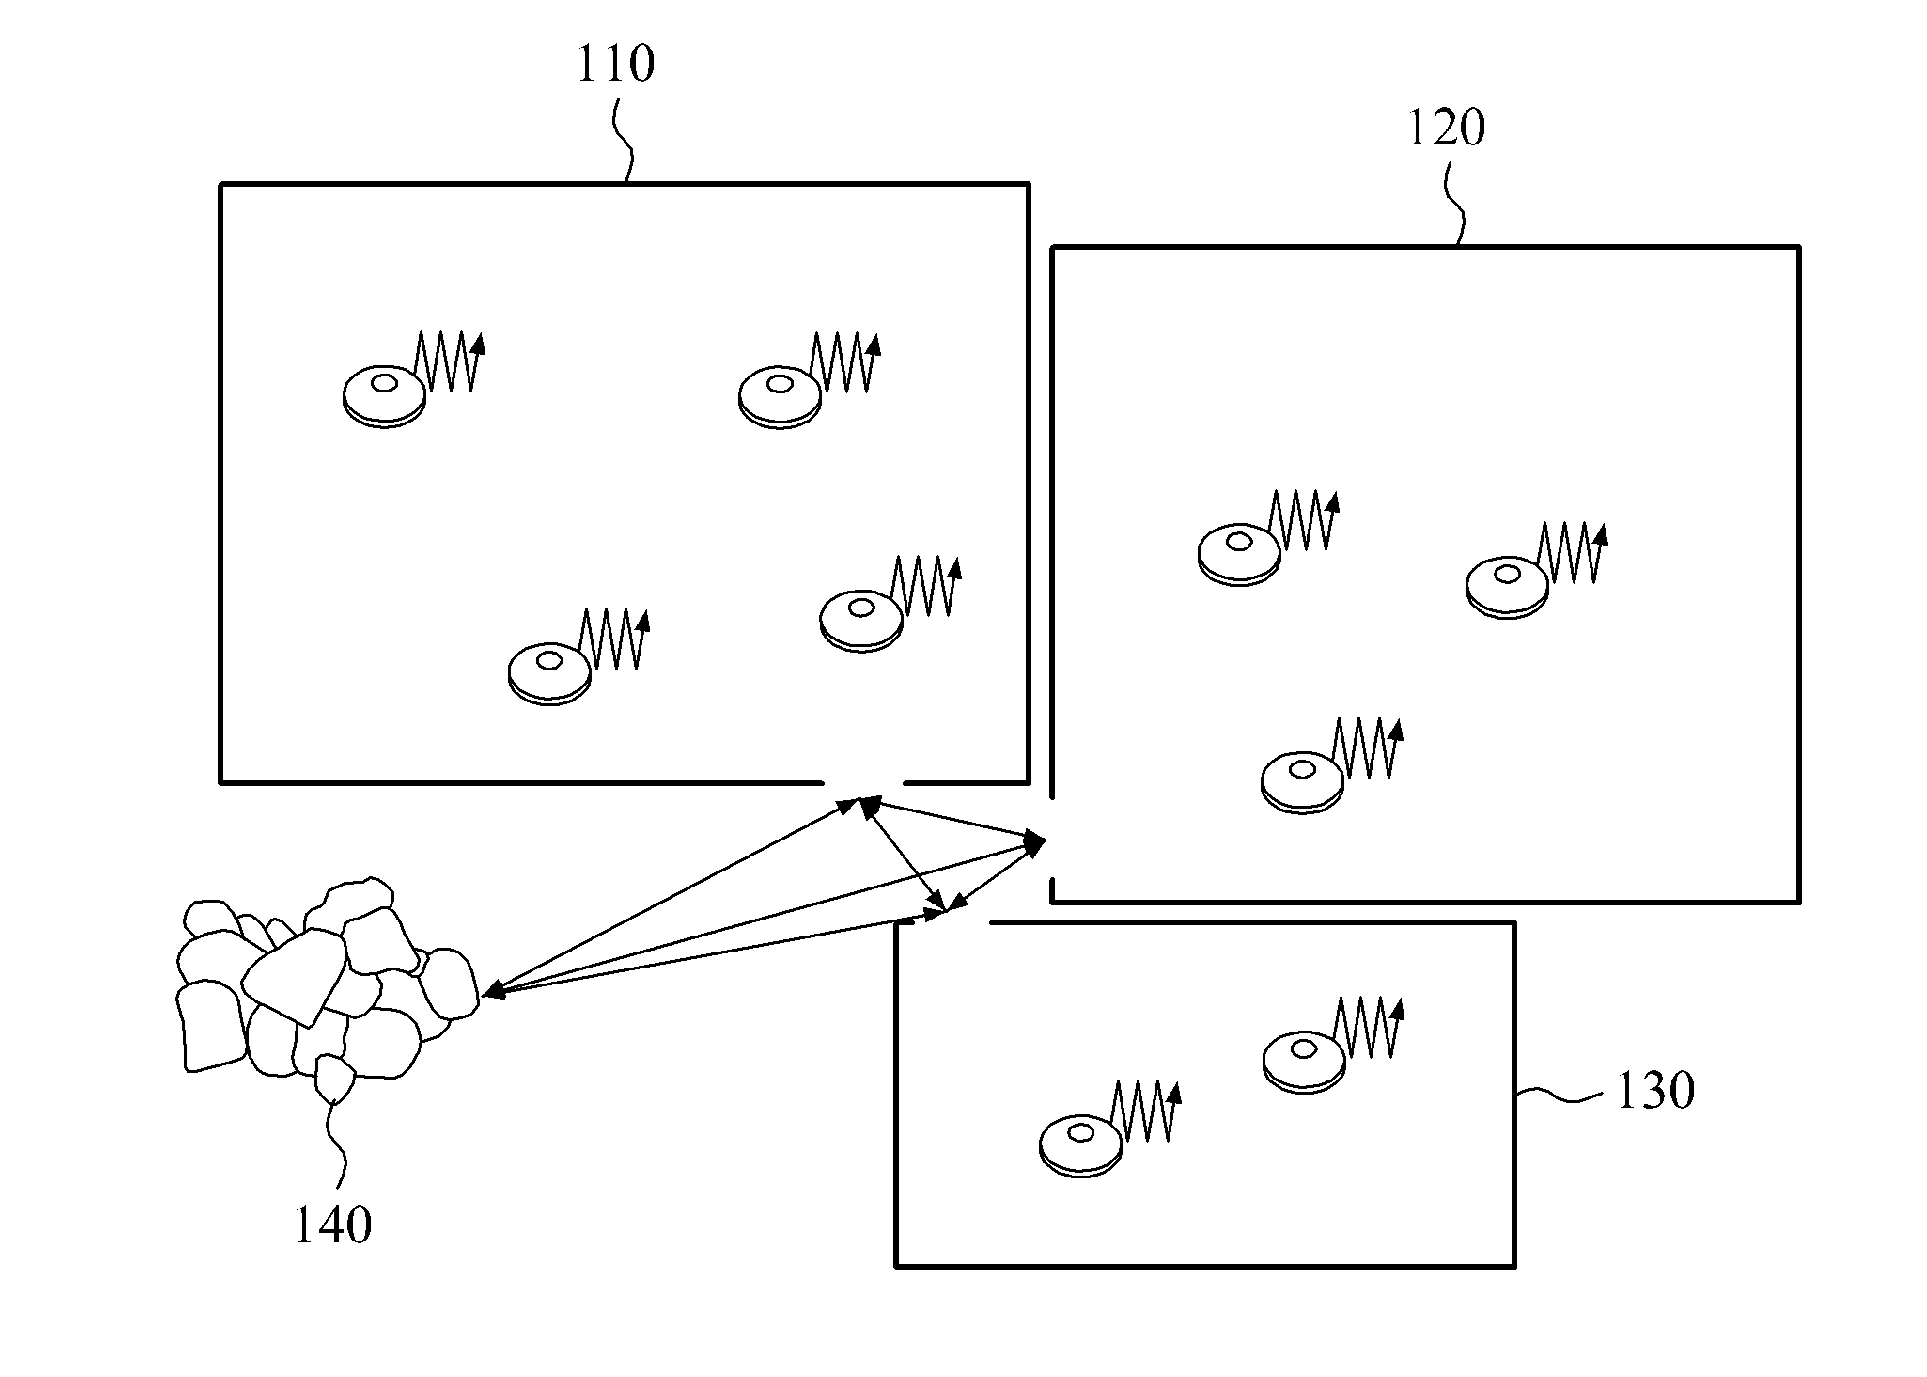 Method and control apparatus for cooperative cleaning using multiple robots